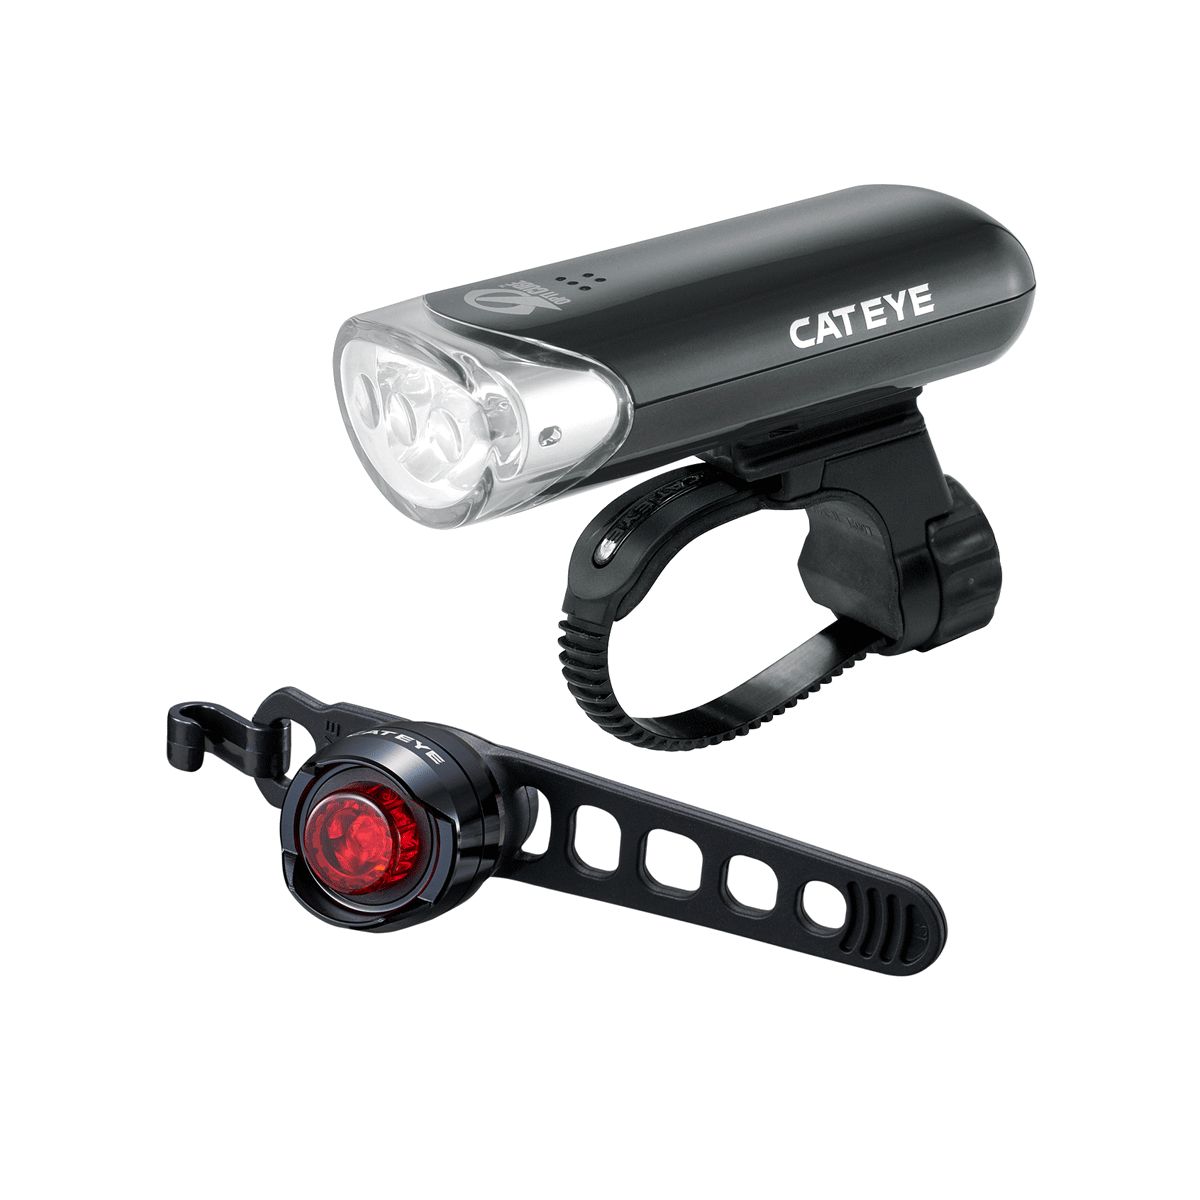 Cateye AMPP 400 & ORB USB Rechargeable Light Set | cykellygte